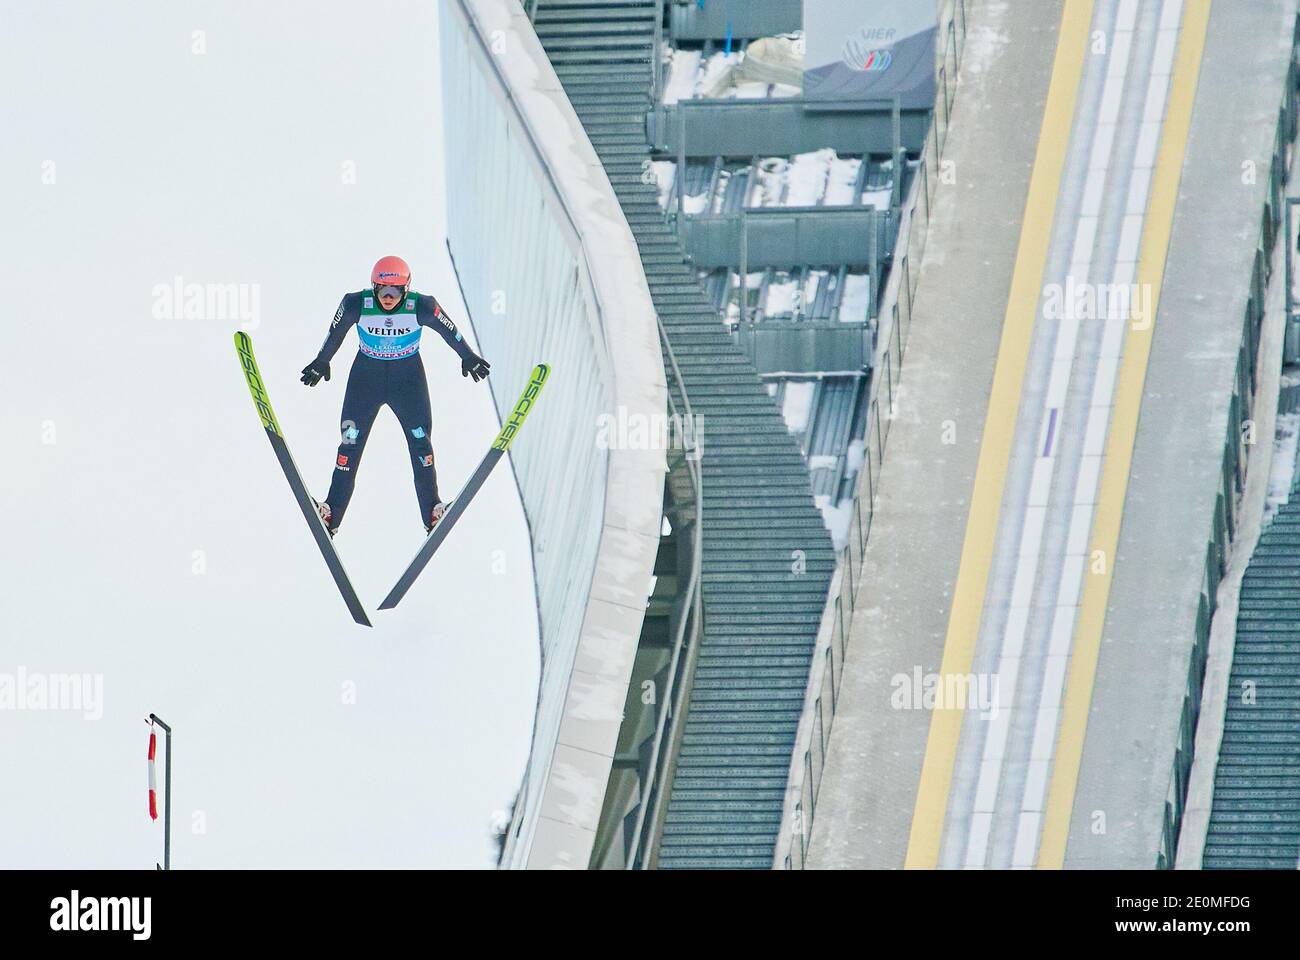 Karl GEIGER, GER  in action at the Four Hills Tournament Ski Jumping at Olympic Stadium, Grosse Olympiaschanze in Garmisch-Partenkirchen, Bavaria, Germany, January 01, 2021.  © Peter Schatz / Alamy Live News Stock Photo